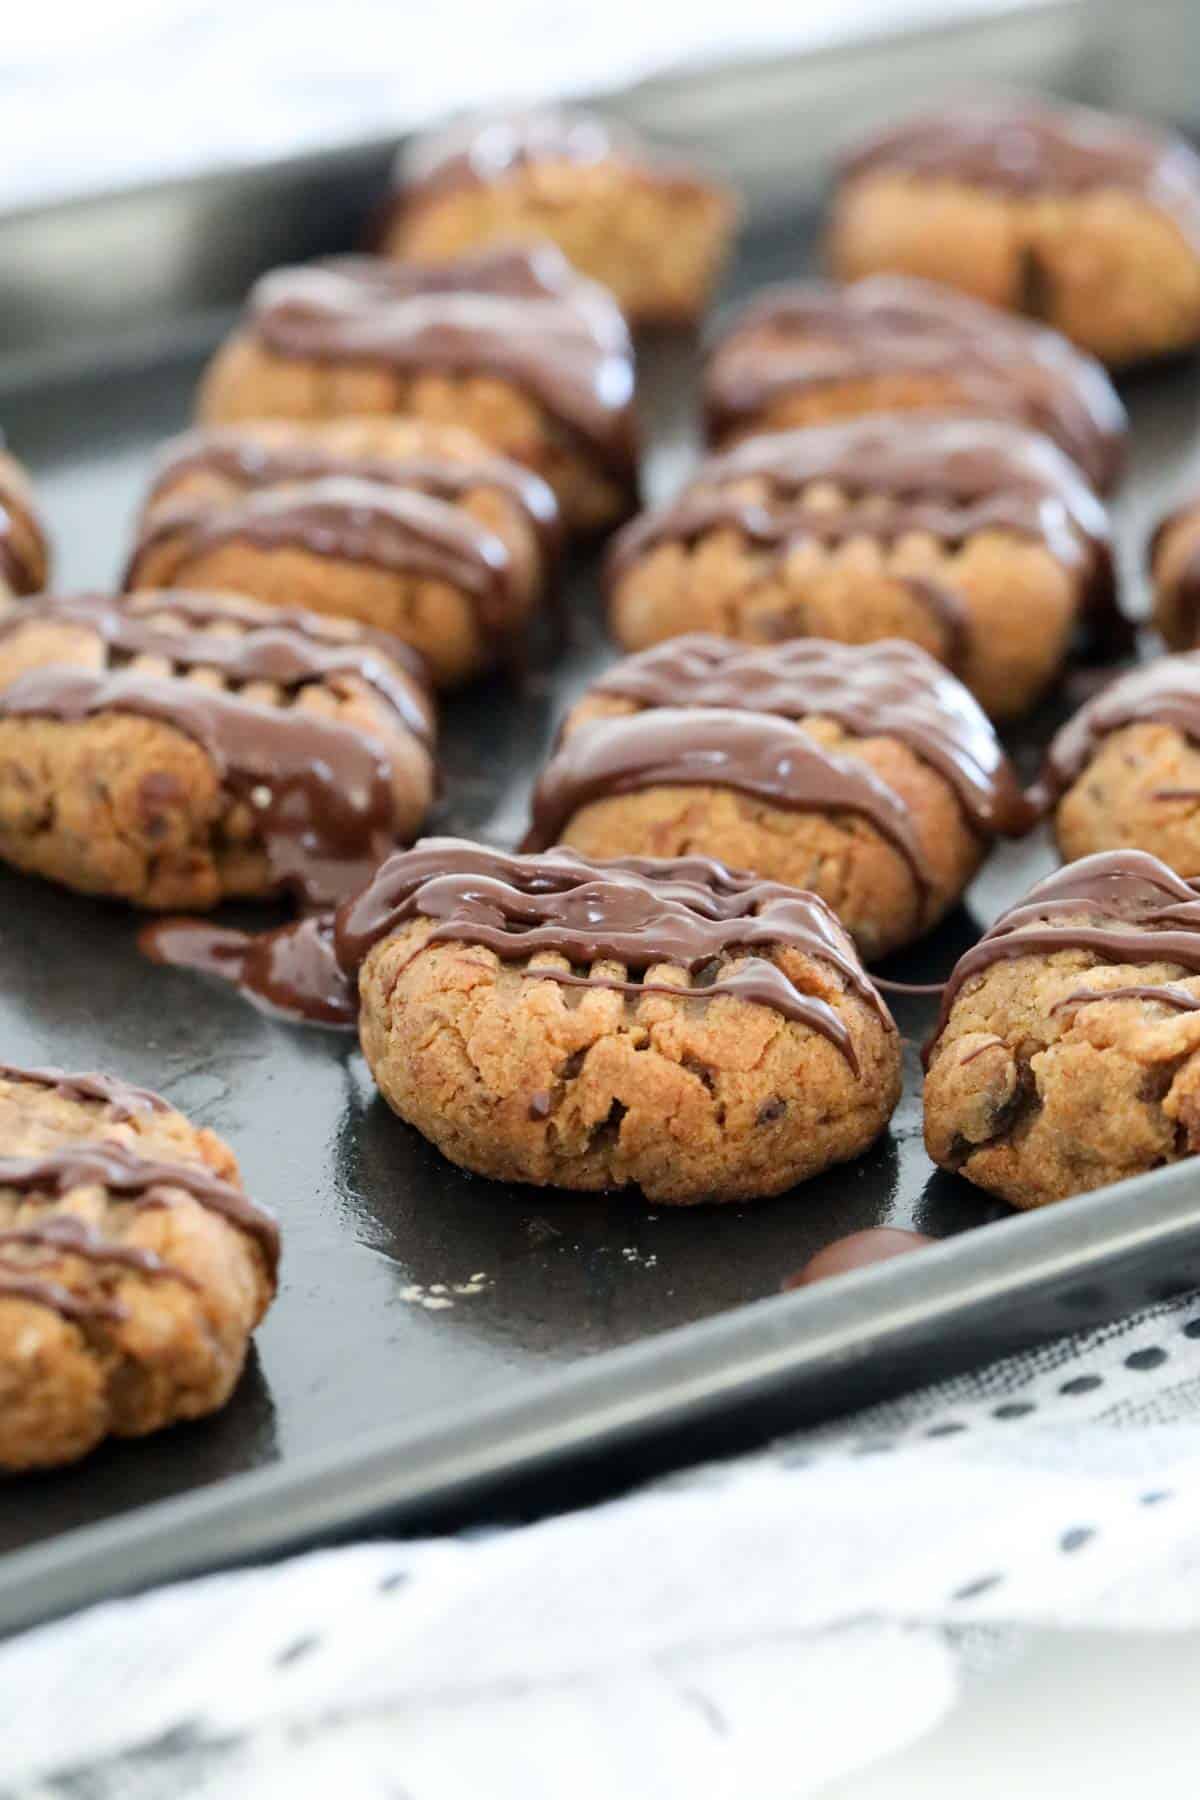 Date cookies on baking tray drizzled with melted chocolate.